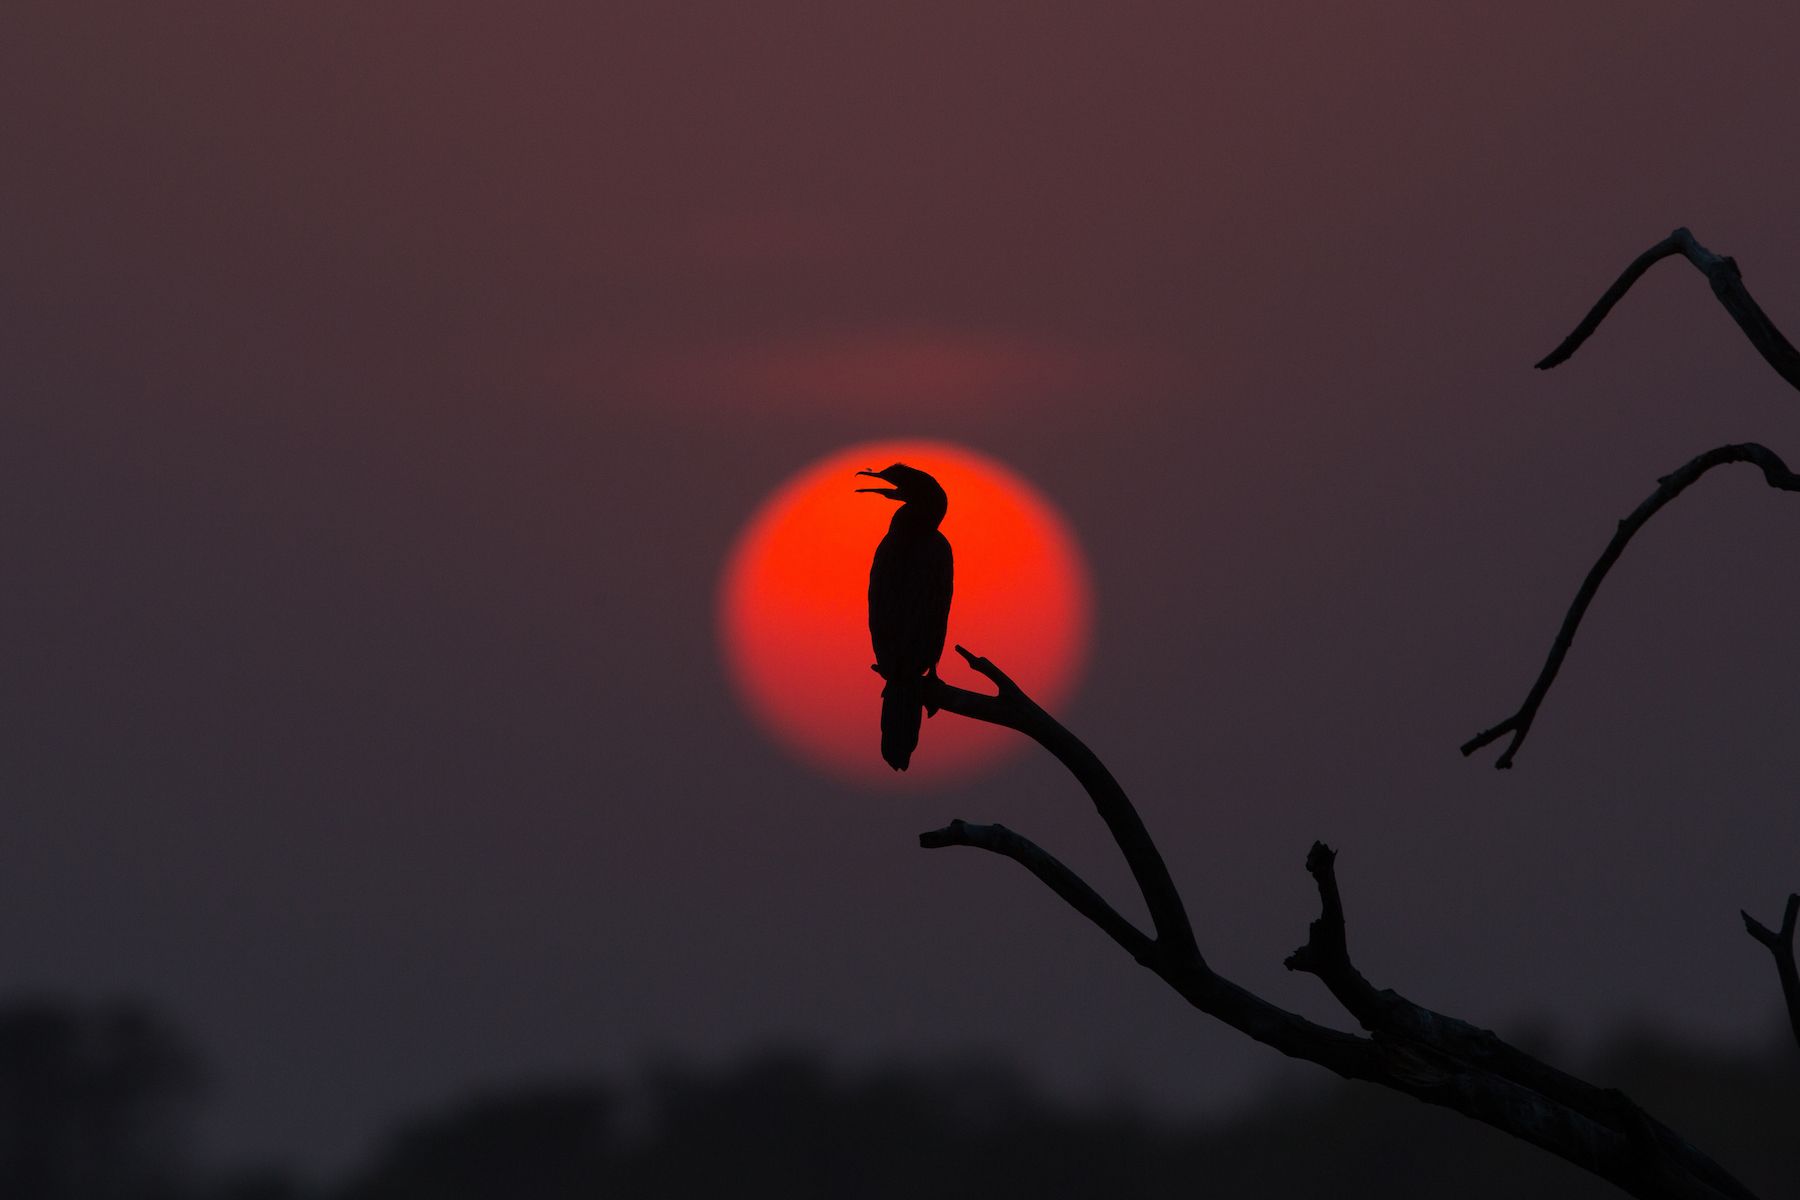 A Little Cormorant watching the sunset at Tadoba, India by Inger Vandyke